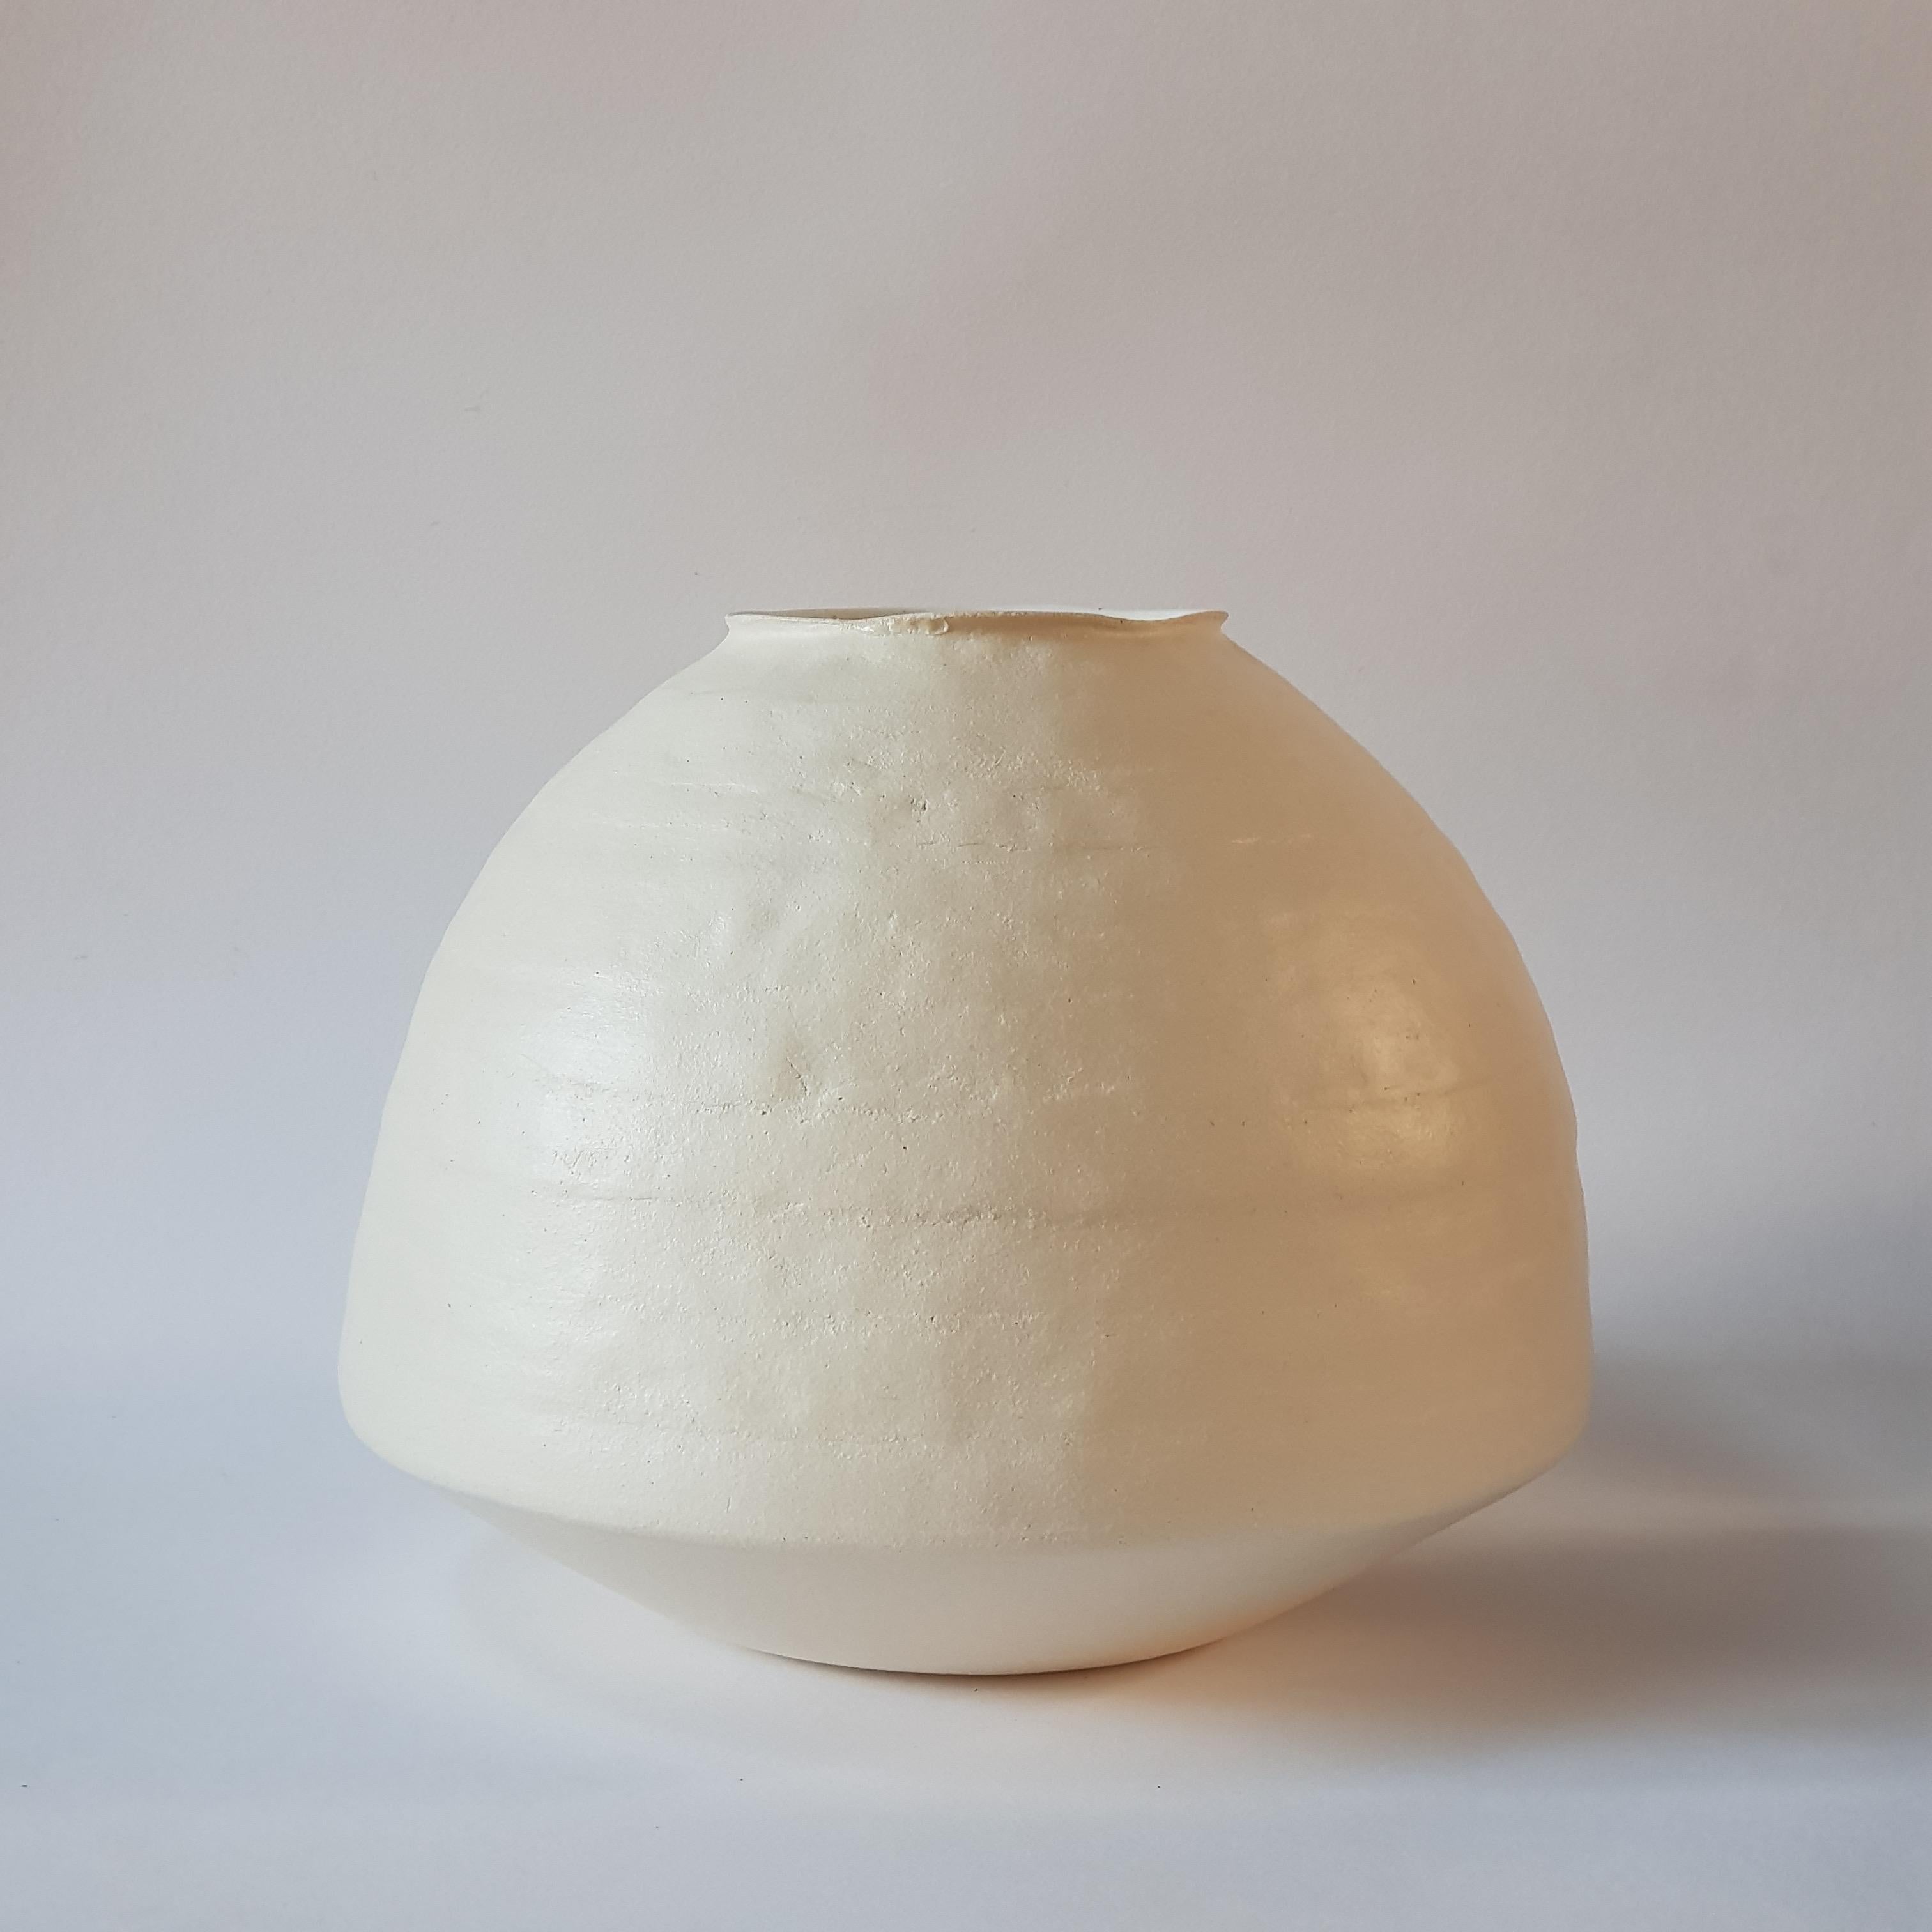 White Stoneware Psykter Vase by Elena Vasilantonaki
Unique
Dimensions: ⌀ 30 x H 25 cm (Dimensions may vary)
Materials: Stoneware
Available finishes: Black, White, Brown, Red, White Patina

Growing up in Greece I was surrounded by pottery forms that